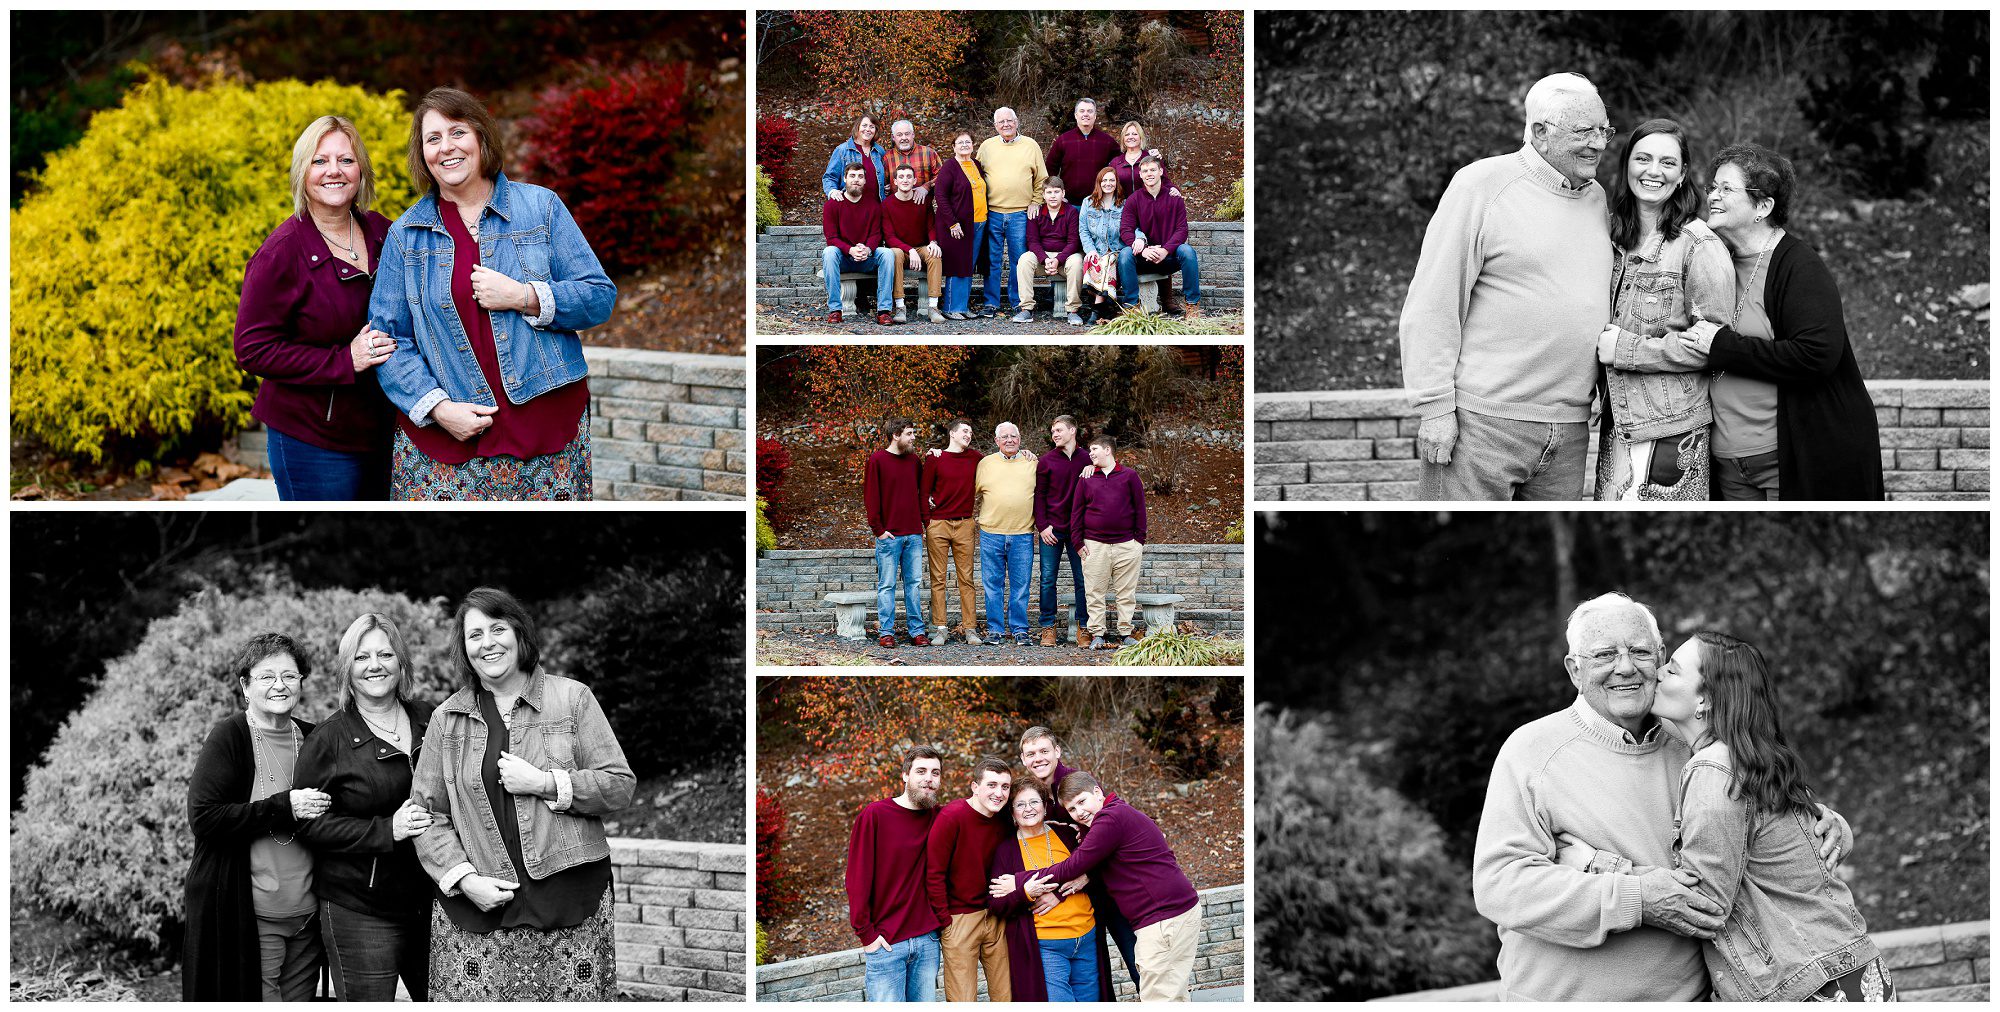 Extended Family Portraits at Lake Monticello Photographer pictures charlottesville photography grandparents grandchildren together winter fluvanna